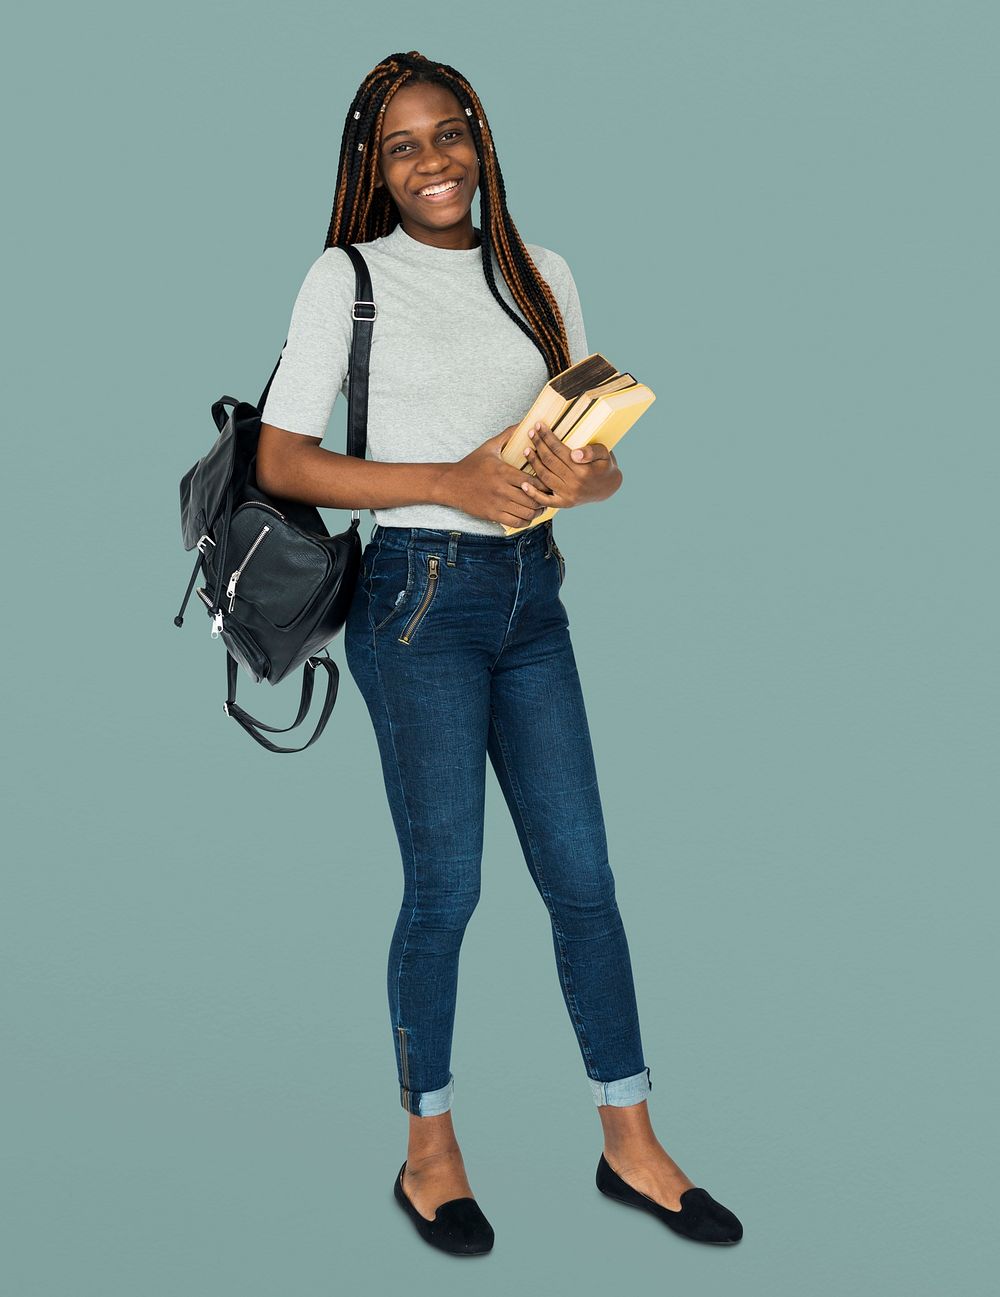 African girl student smiling and holding textbook